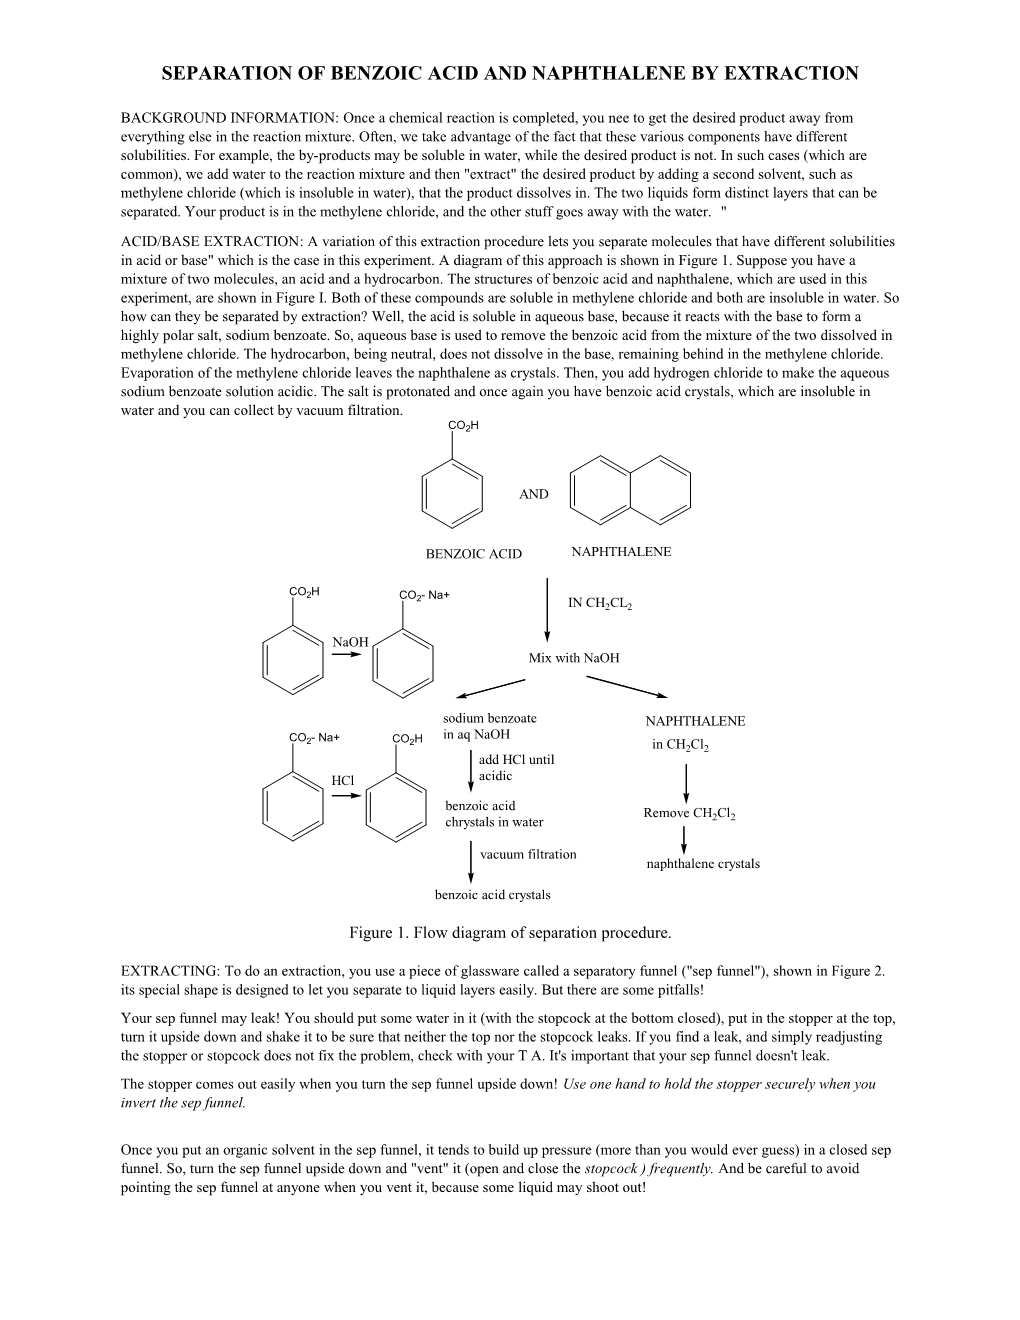 Separation of Benzoic Acid and Naphthalene by Extraction